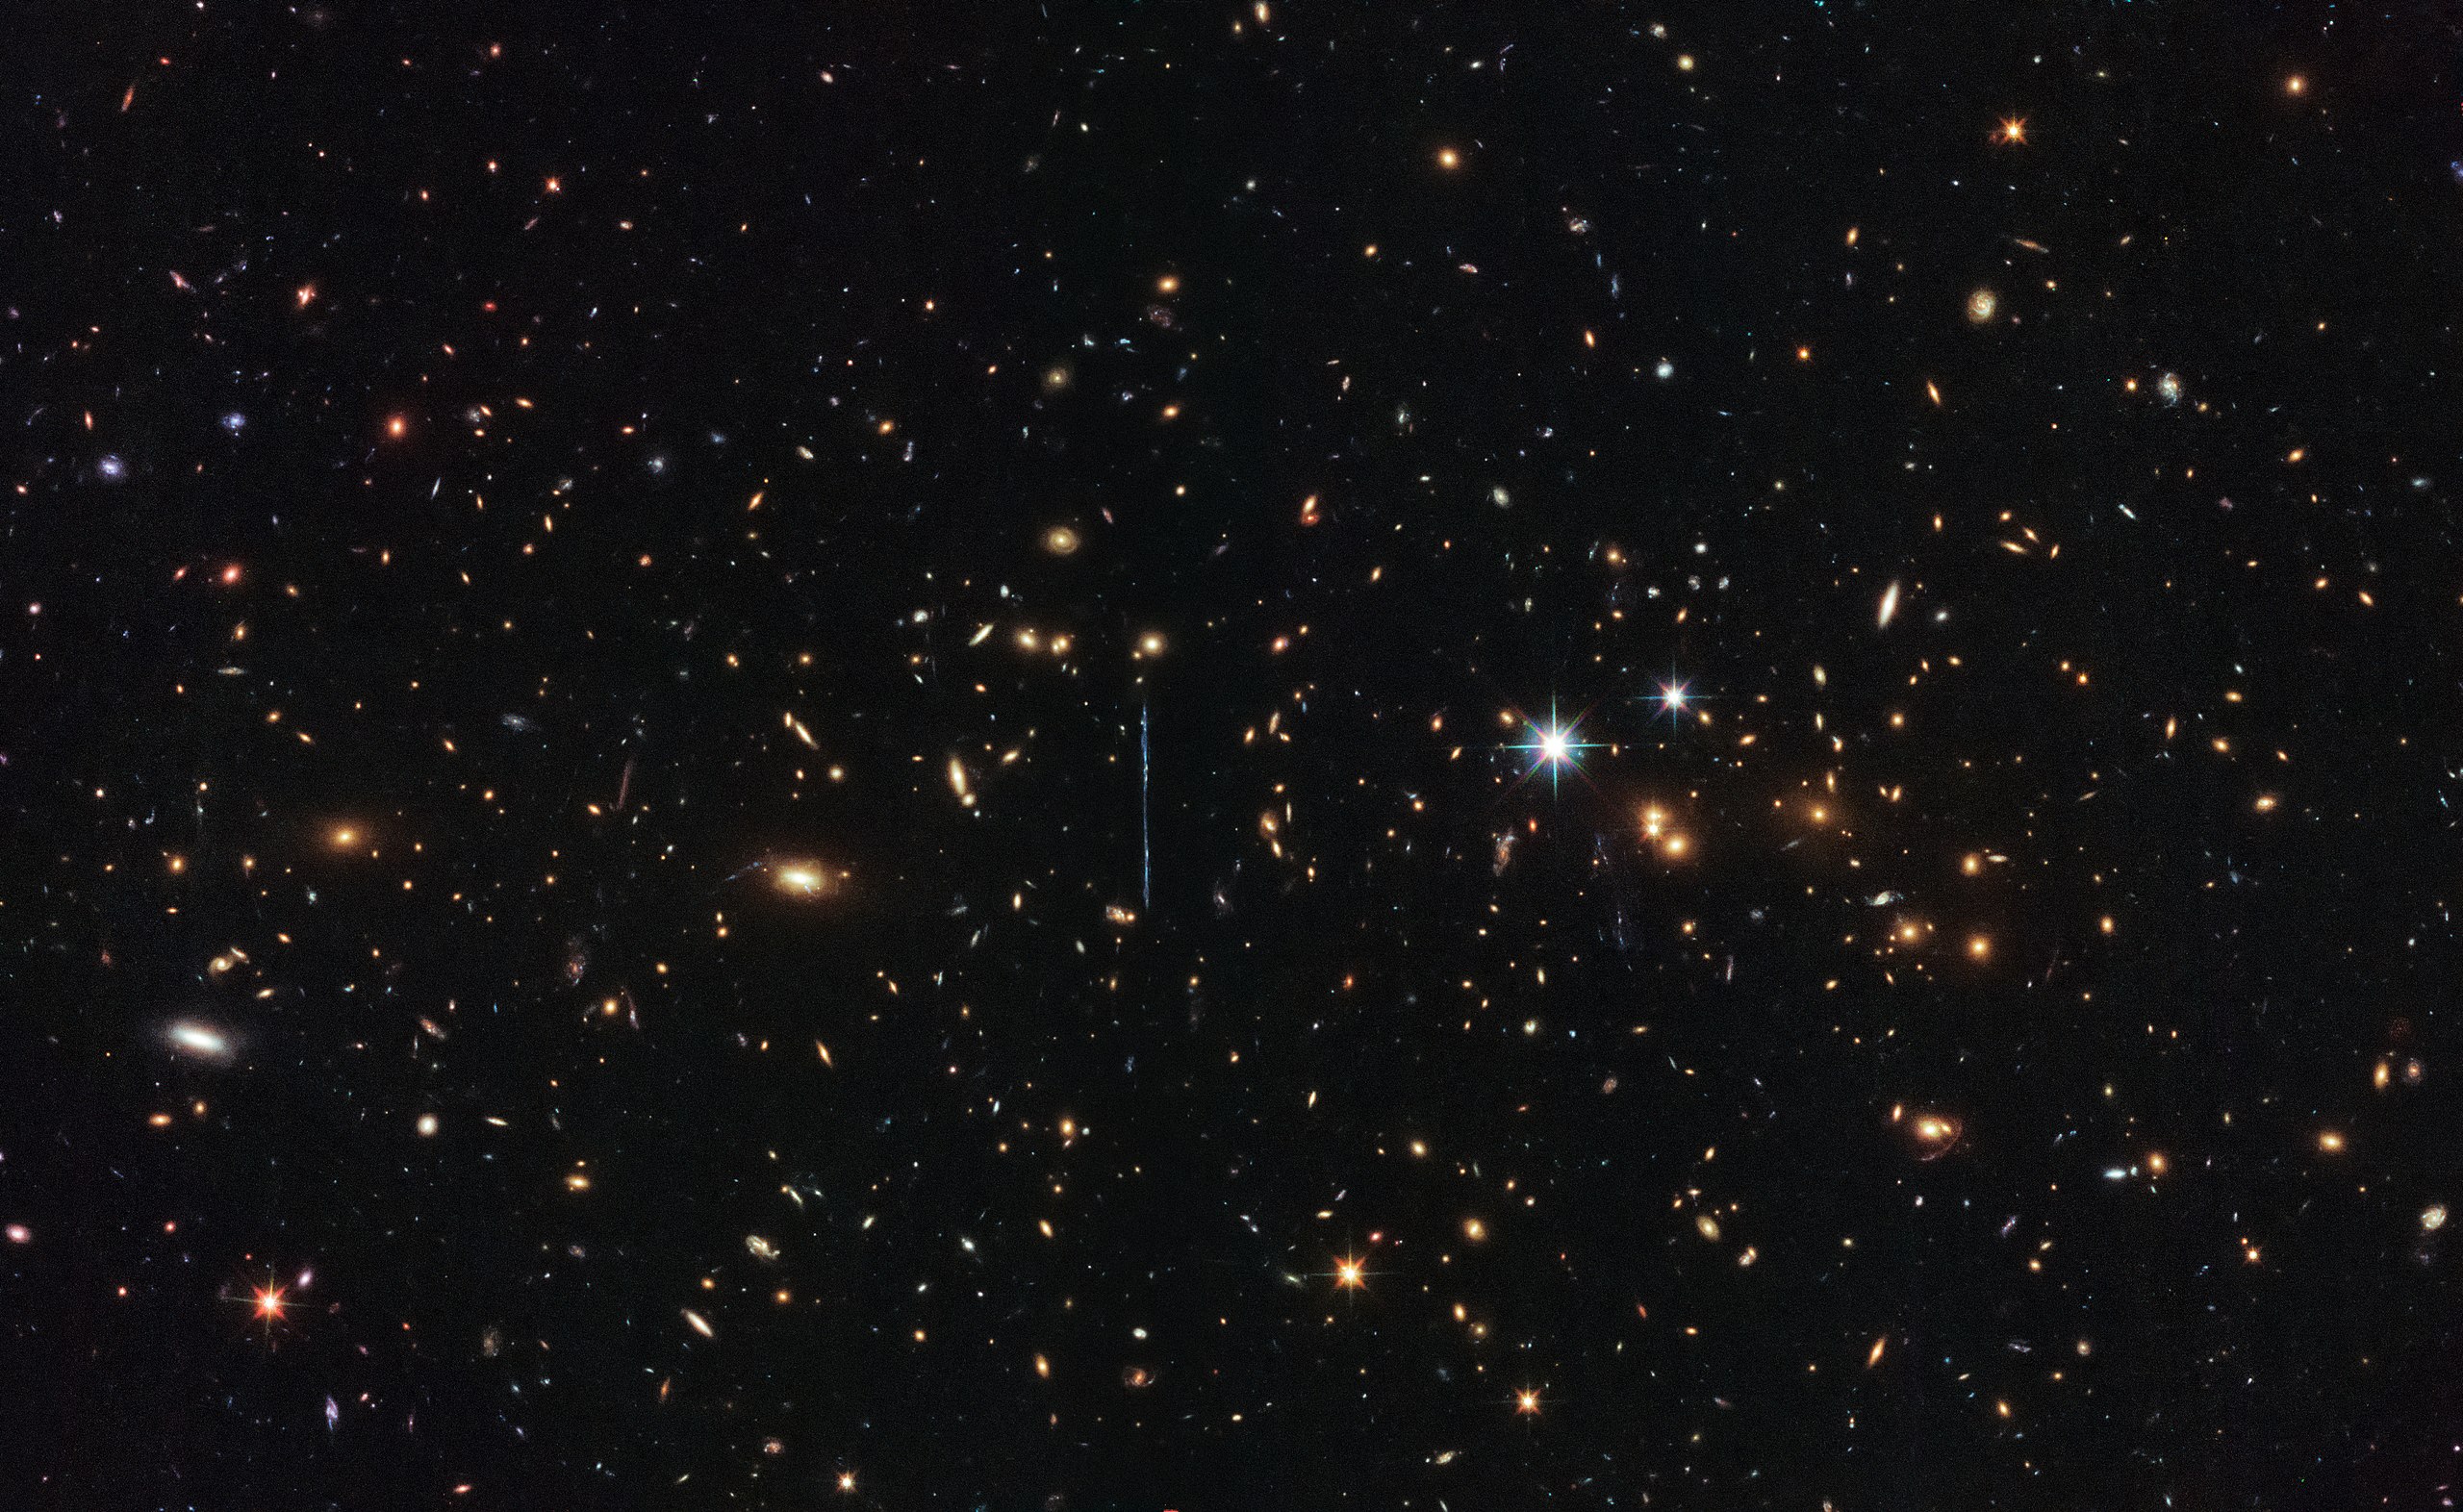 An image of El Gordo, a massive galaxy cluster captured by Hubble